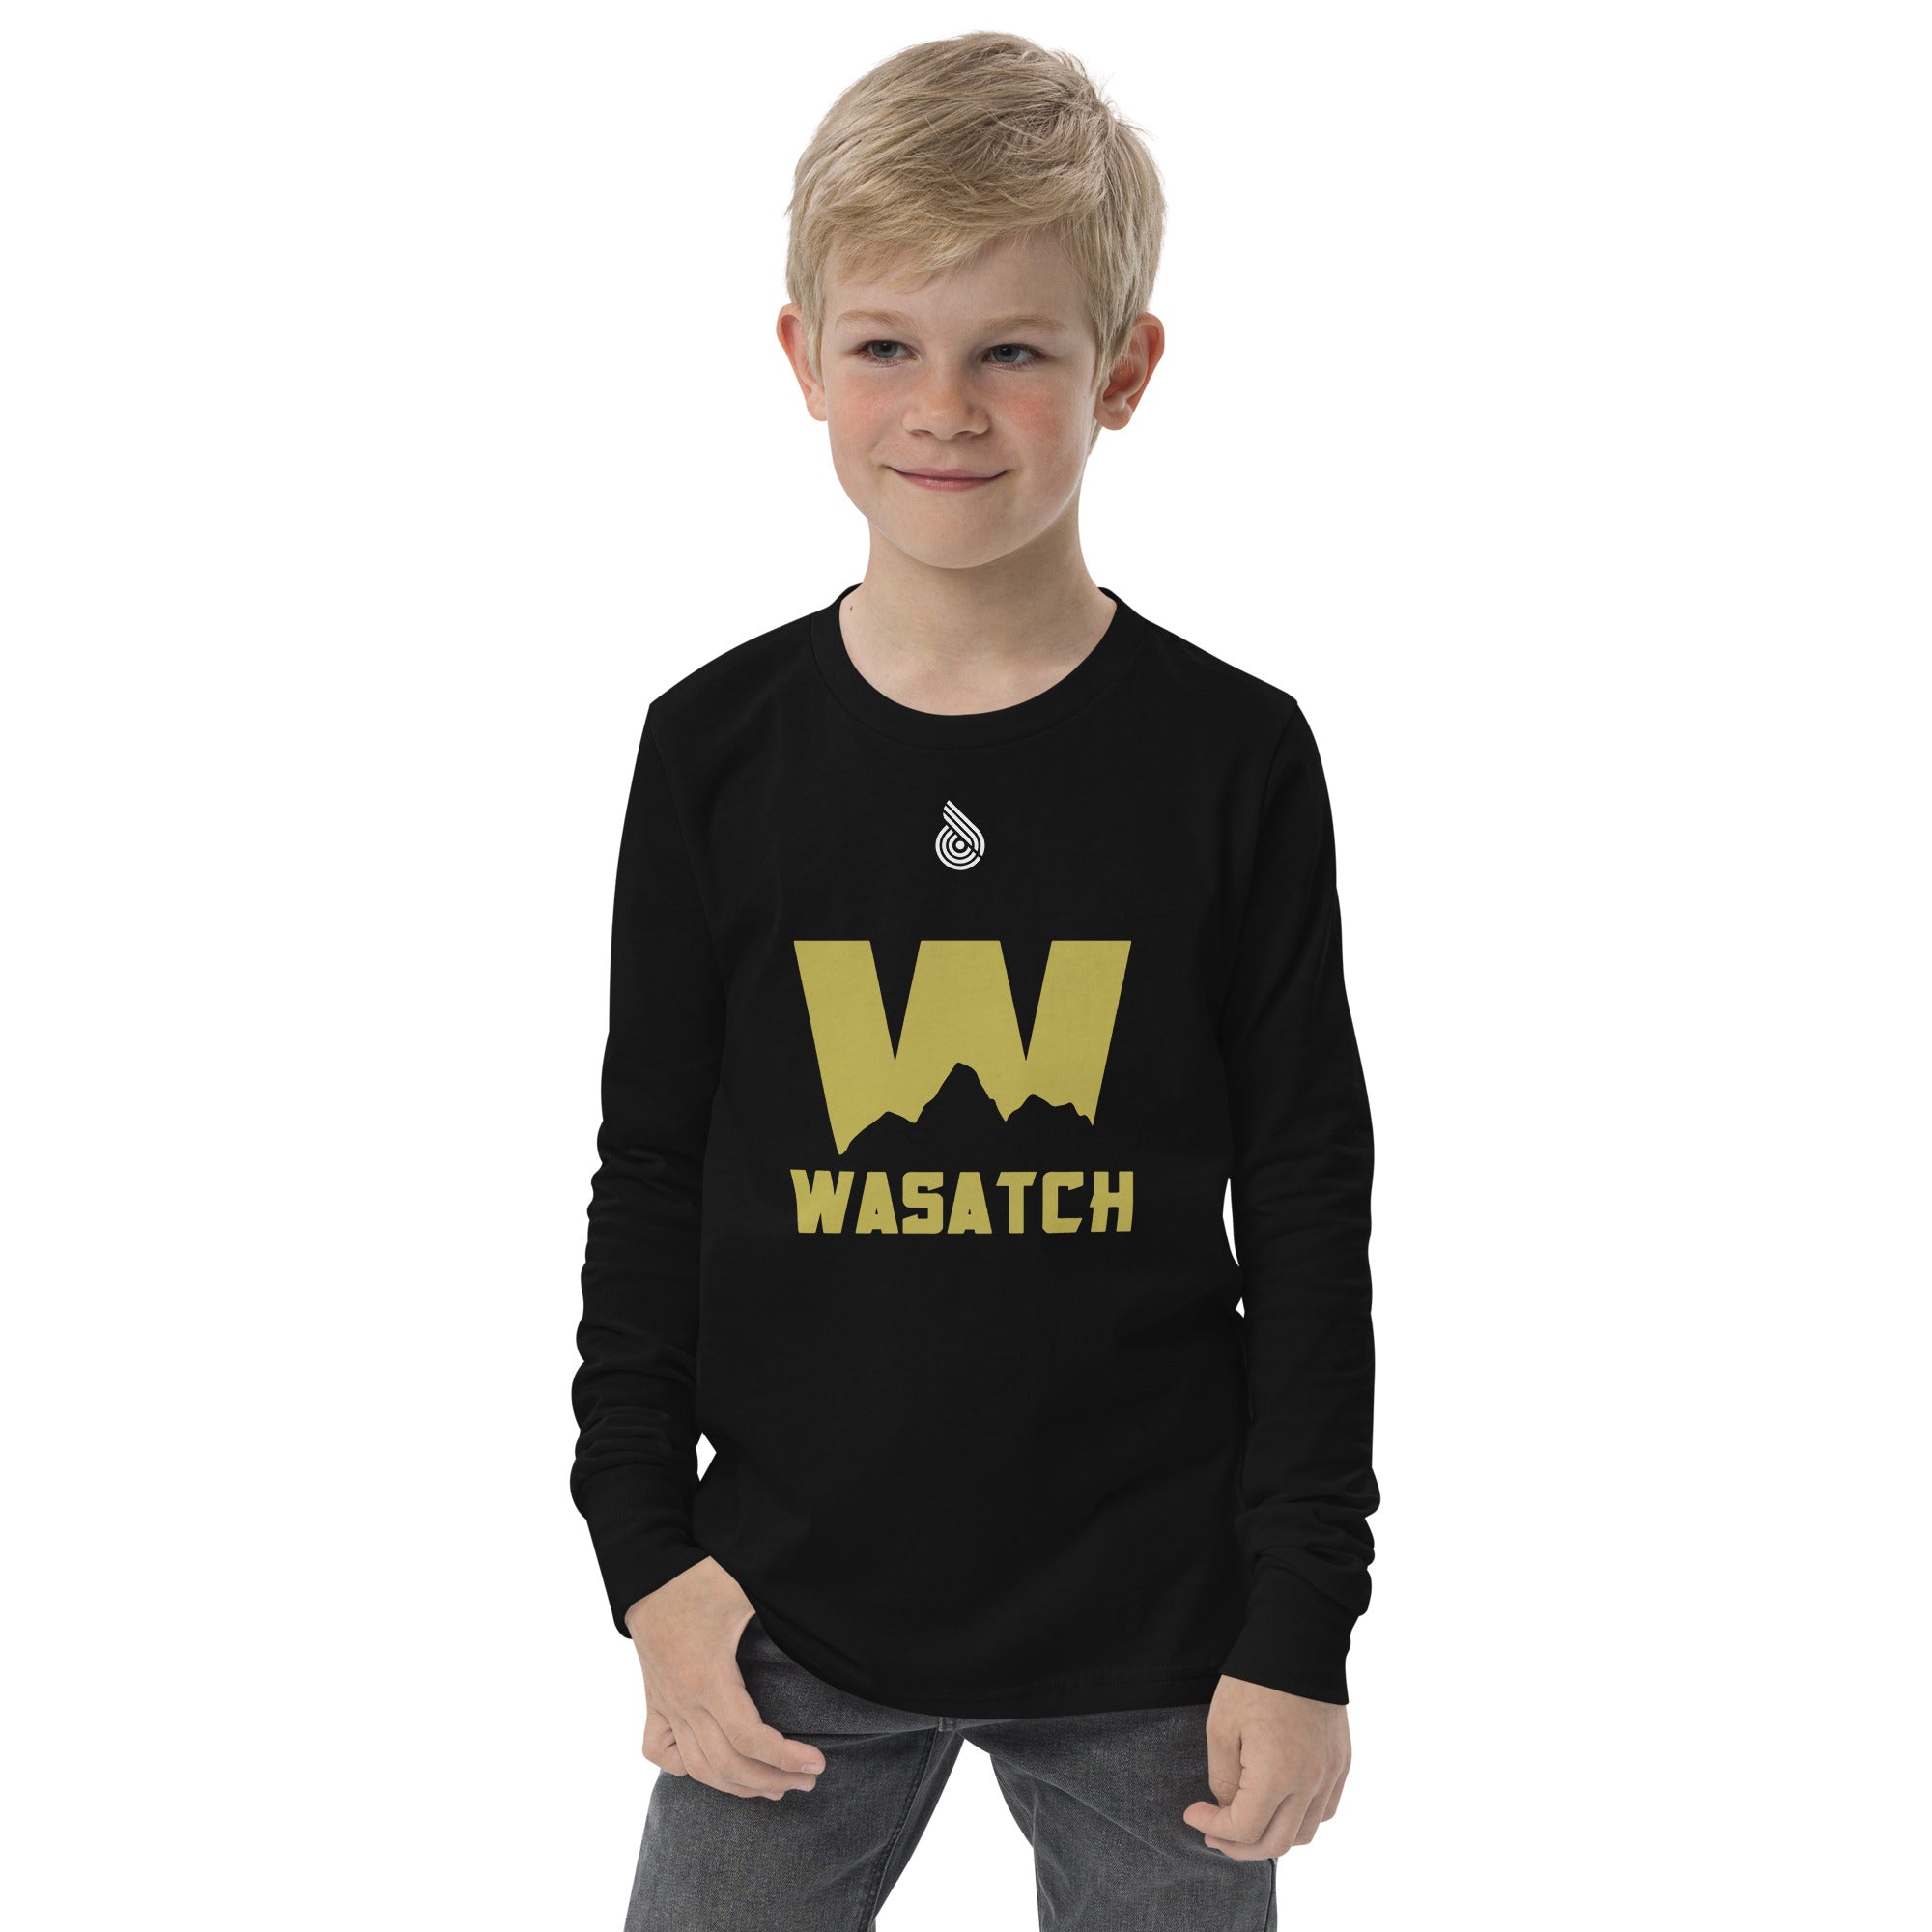 Wasatch Youth long sleeve tee